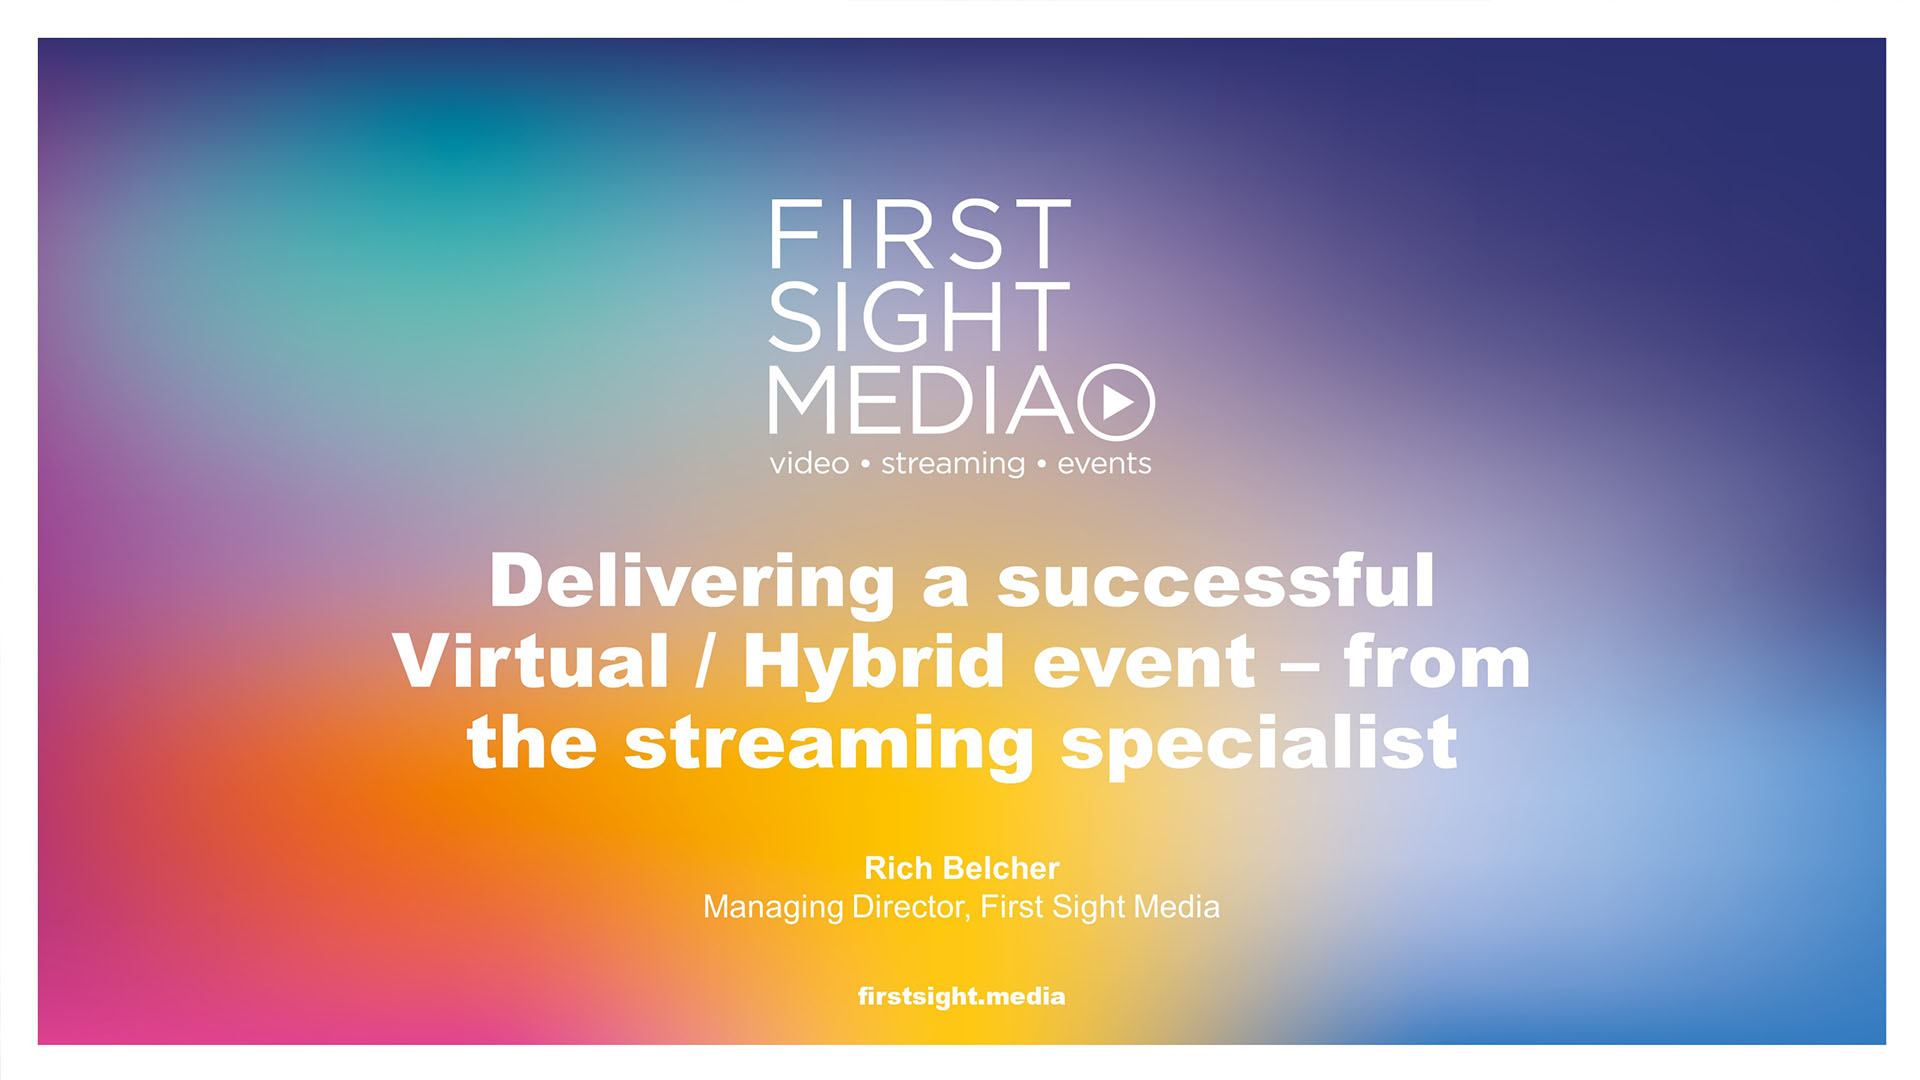 Masterclass - Delivering a Virtual / Hybrid Event